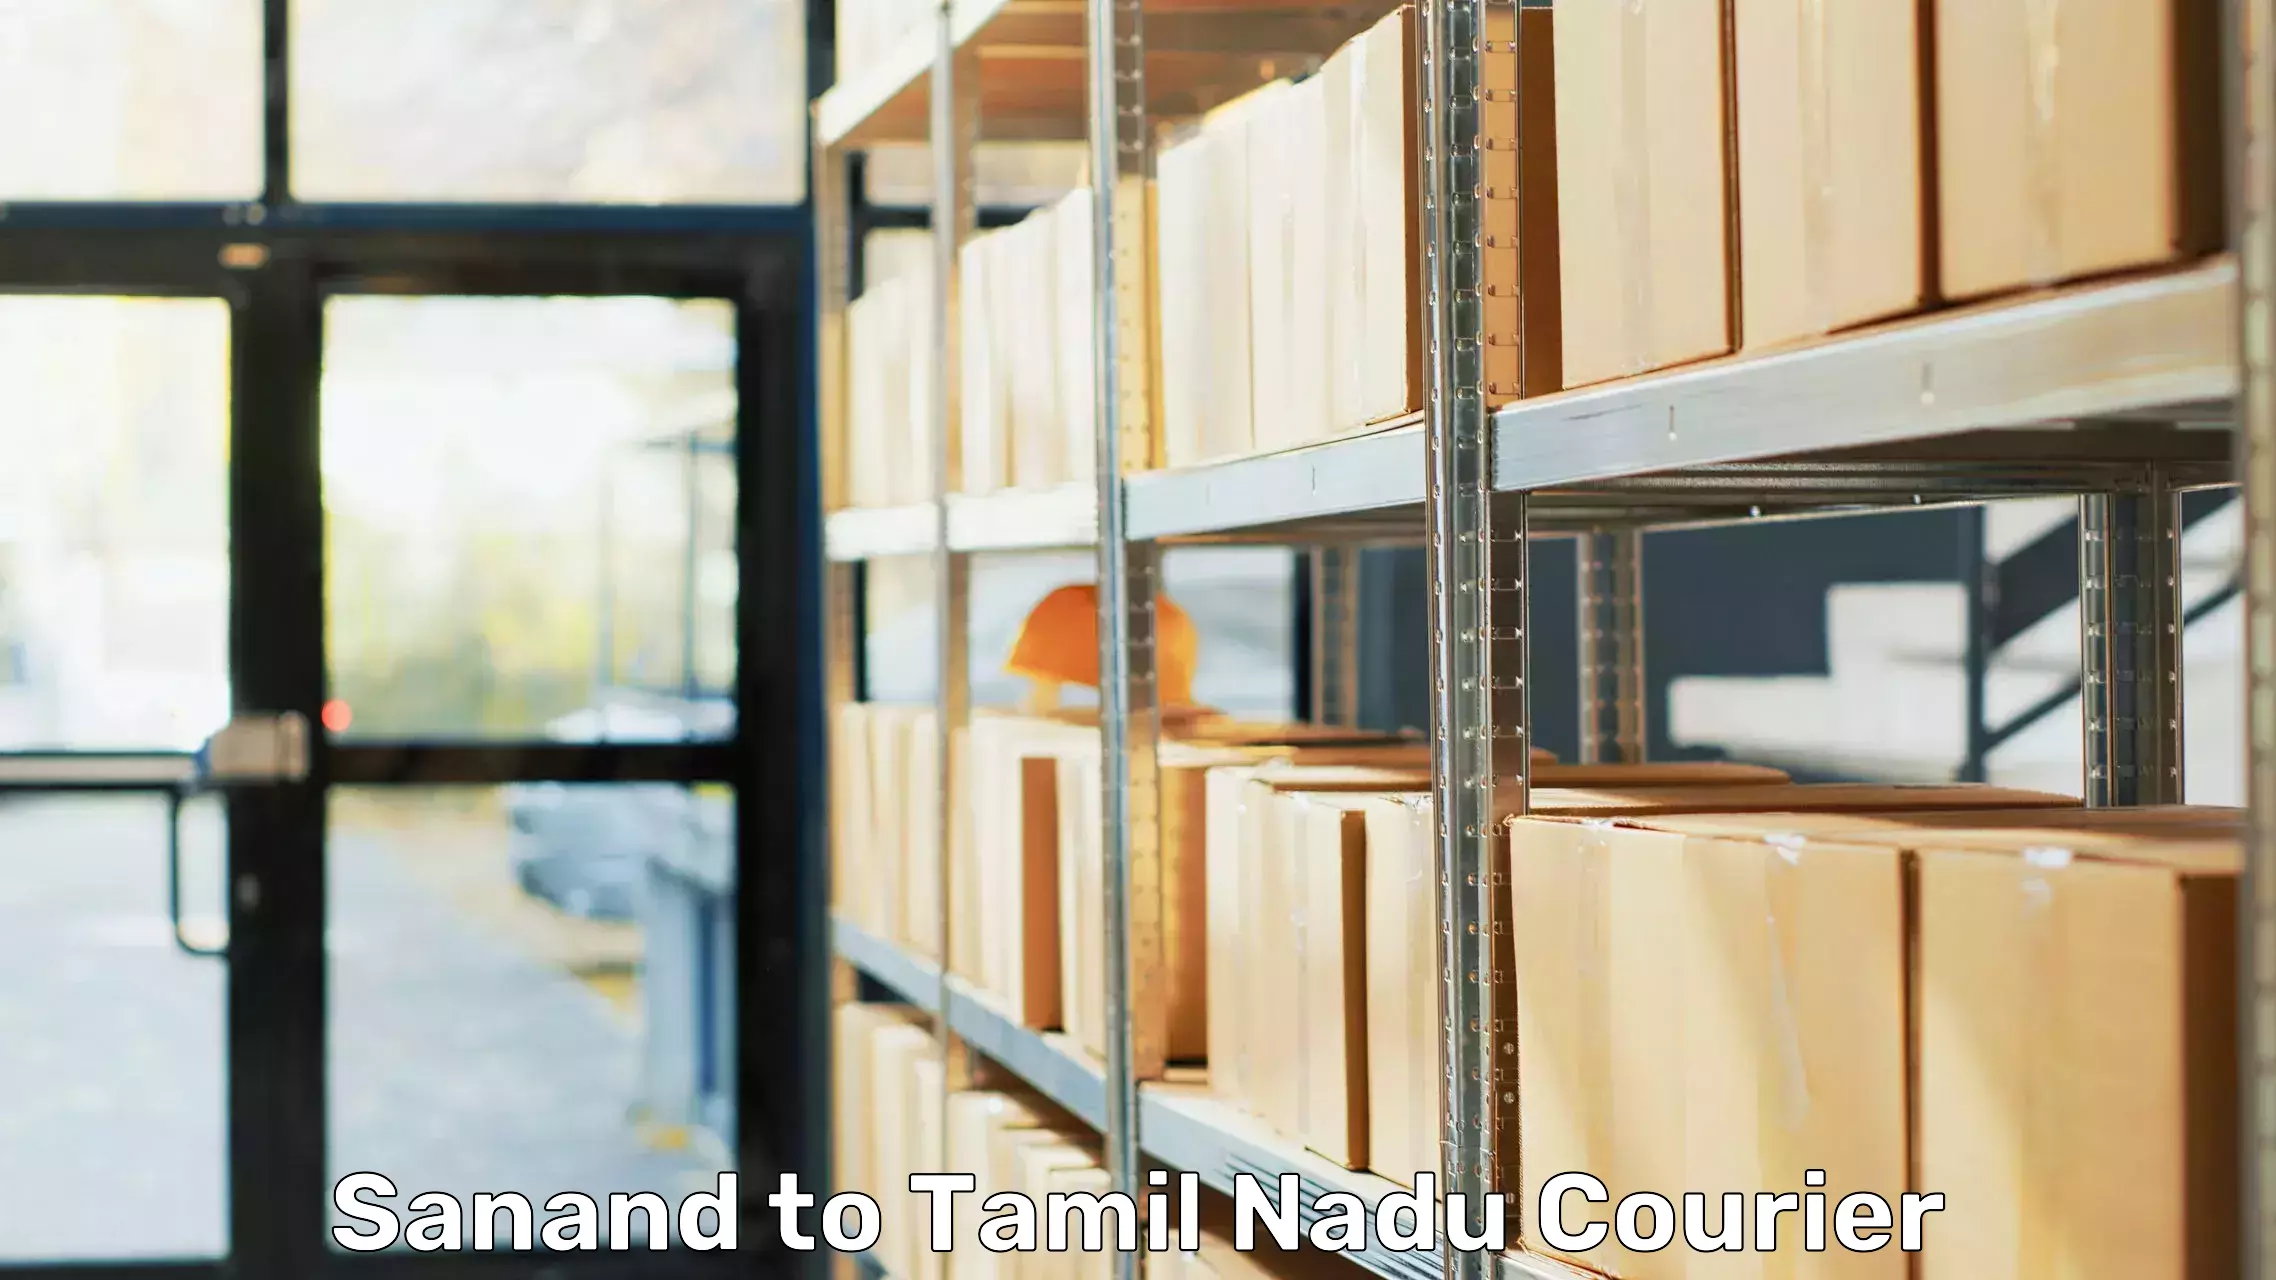 Trusted relocation experts Sanand to Tamil Nadu